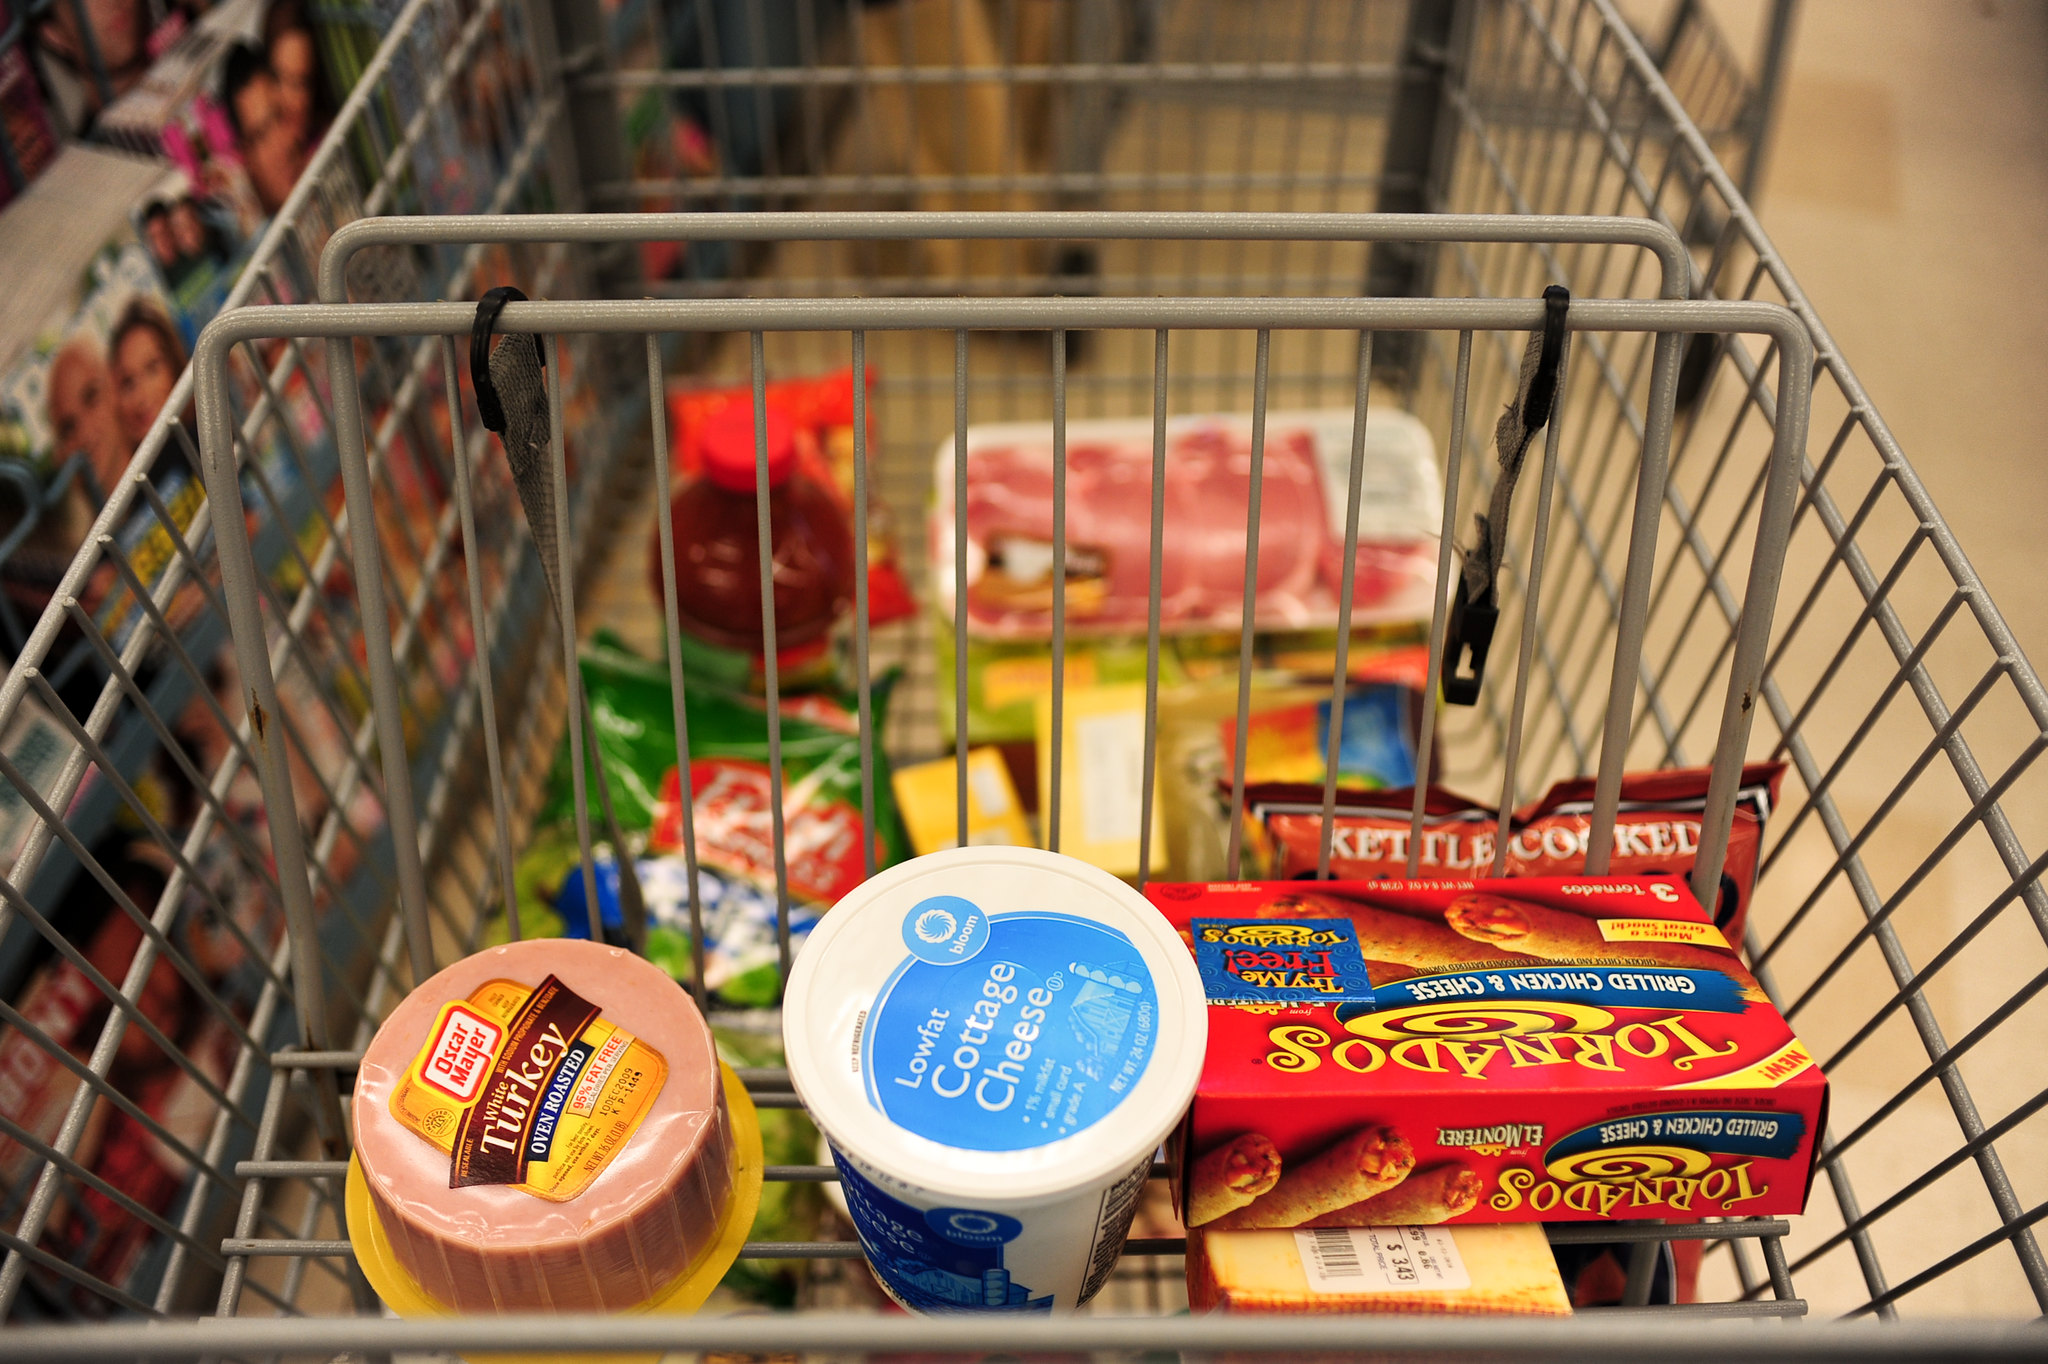 A close-up view of a shopping cart in a grocery store with a few items in the cart.